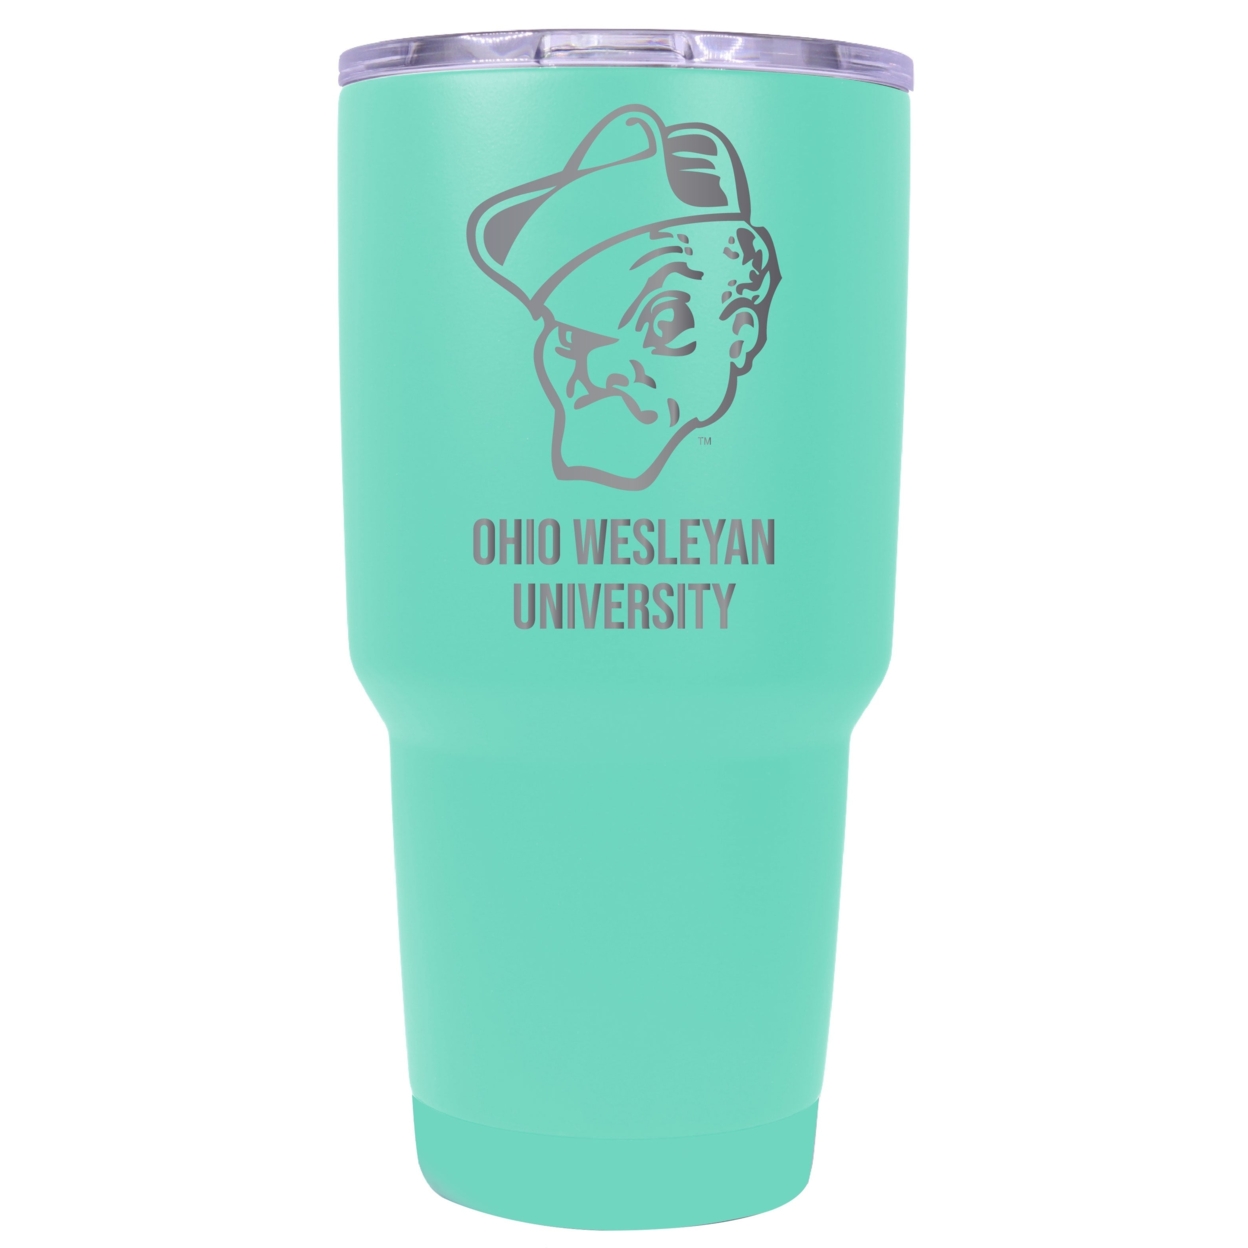 Ohio Wesleyan University 24 Oz Laser Engraved Stainless Steel Insulated Tumbler - Choose Your Color. - Seafoam